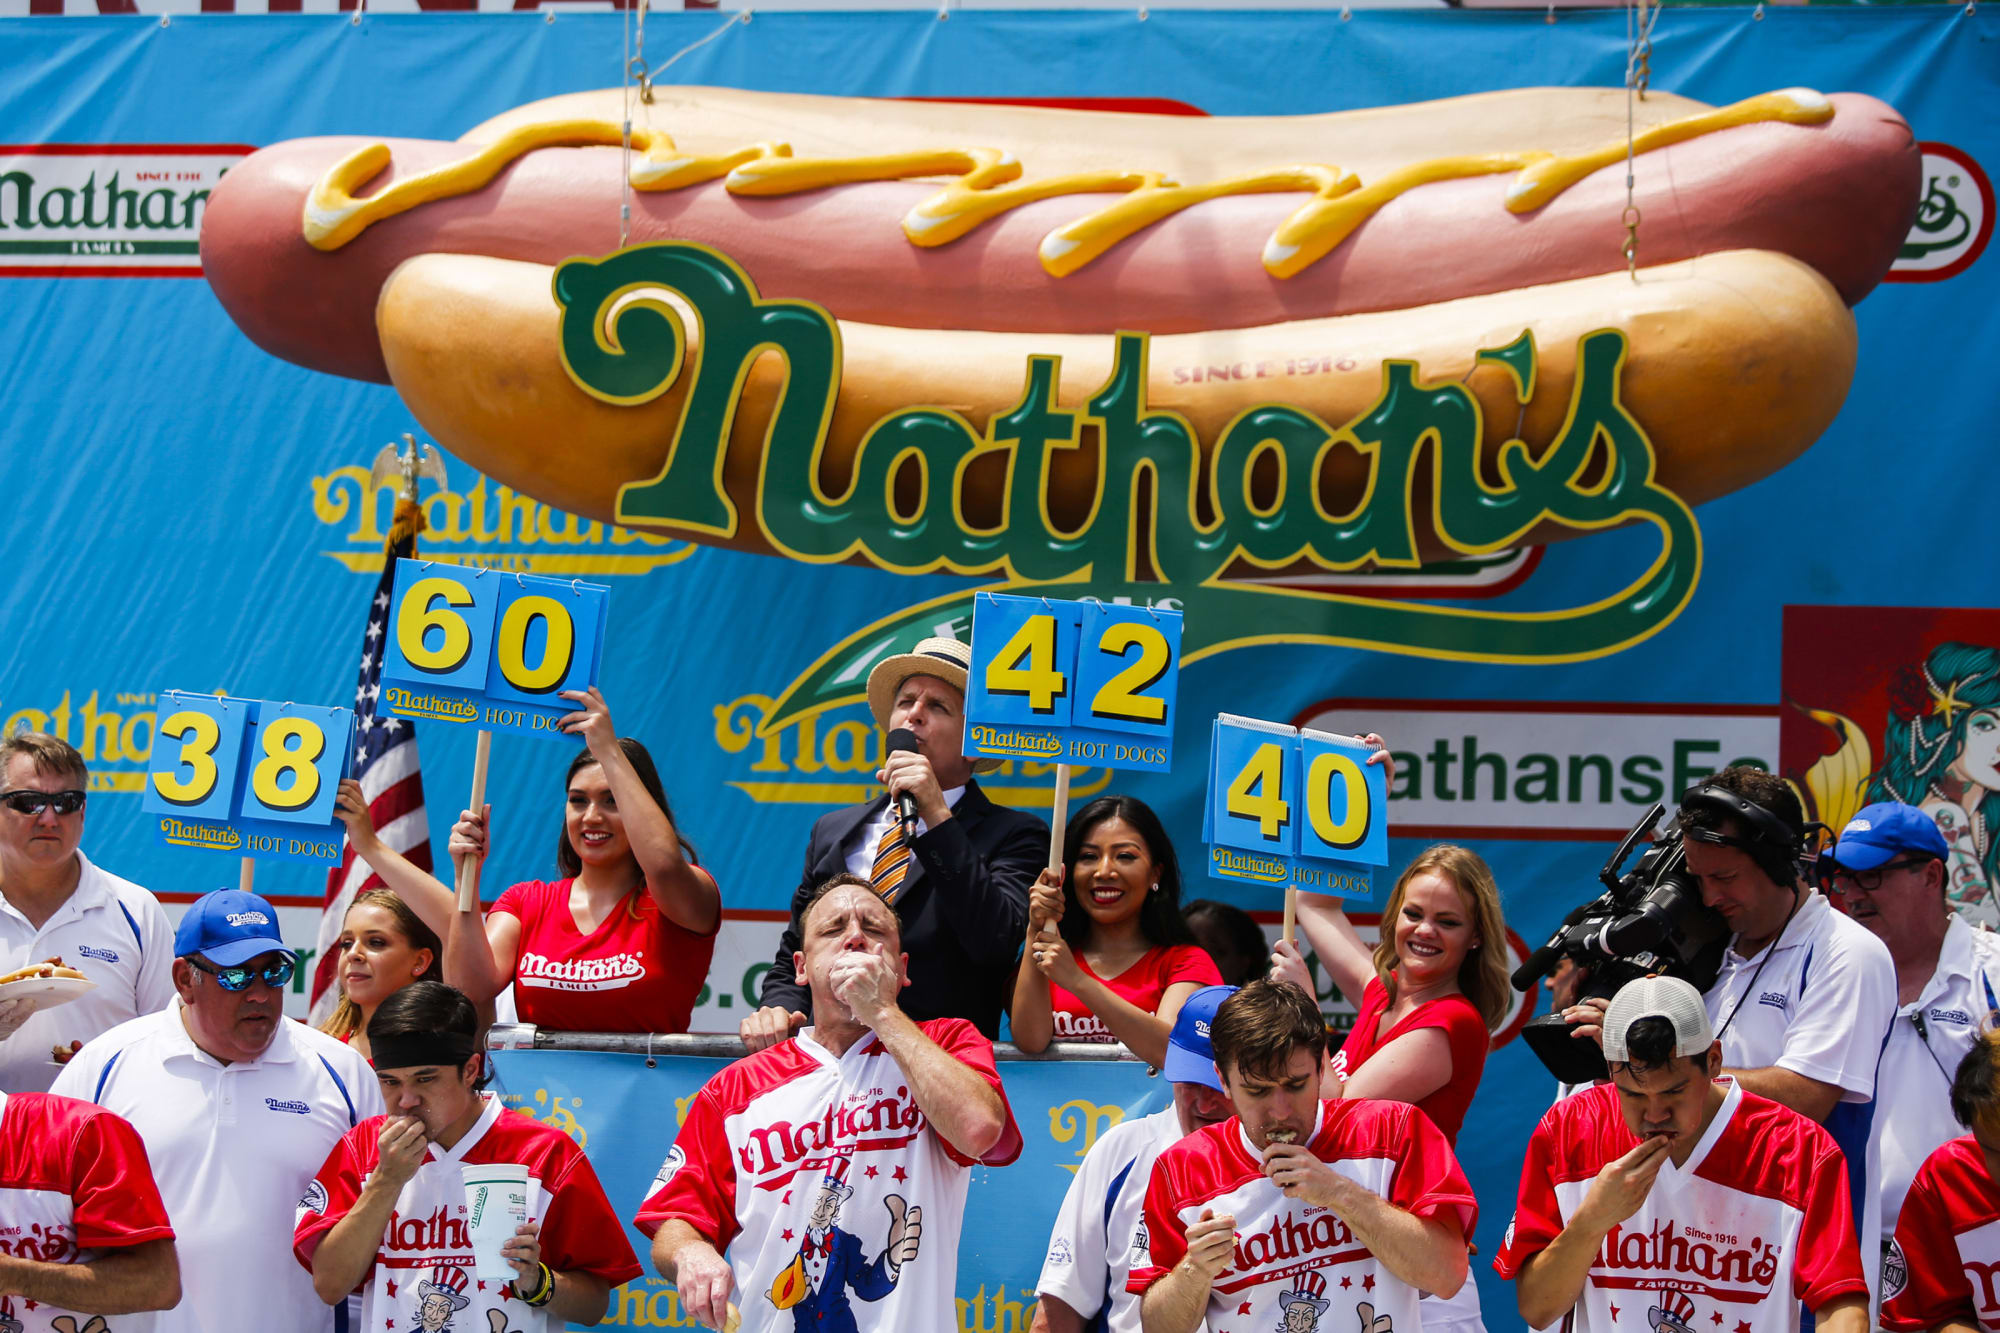 Nathan's Hot Dog Eating Contest still has fans hungry for more